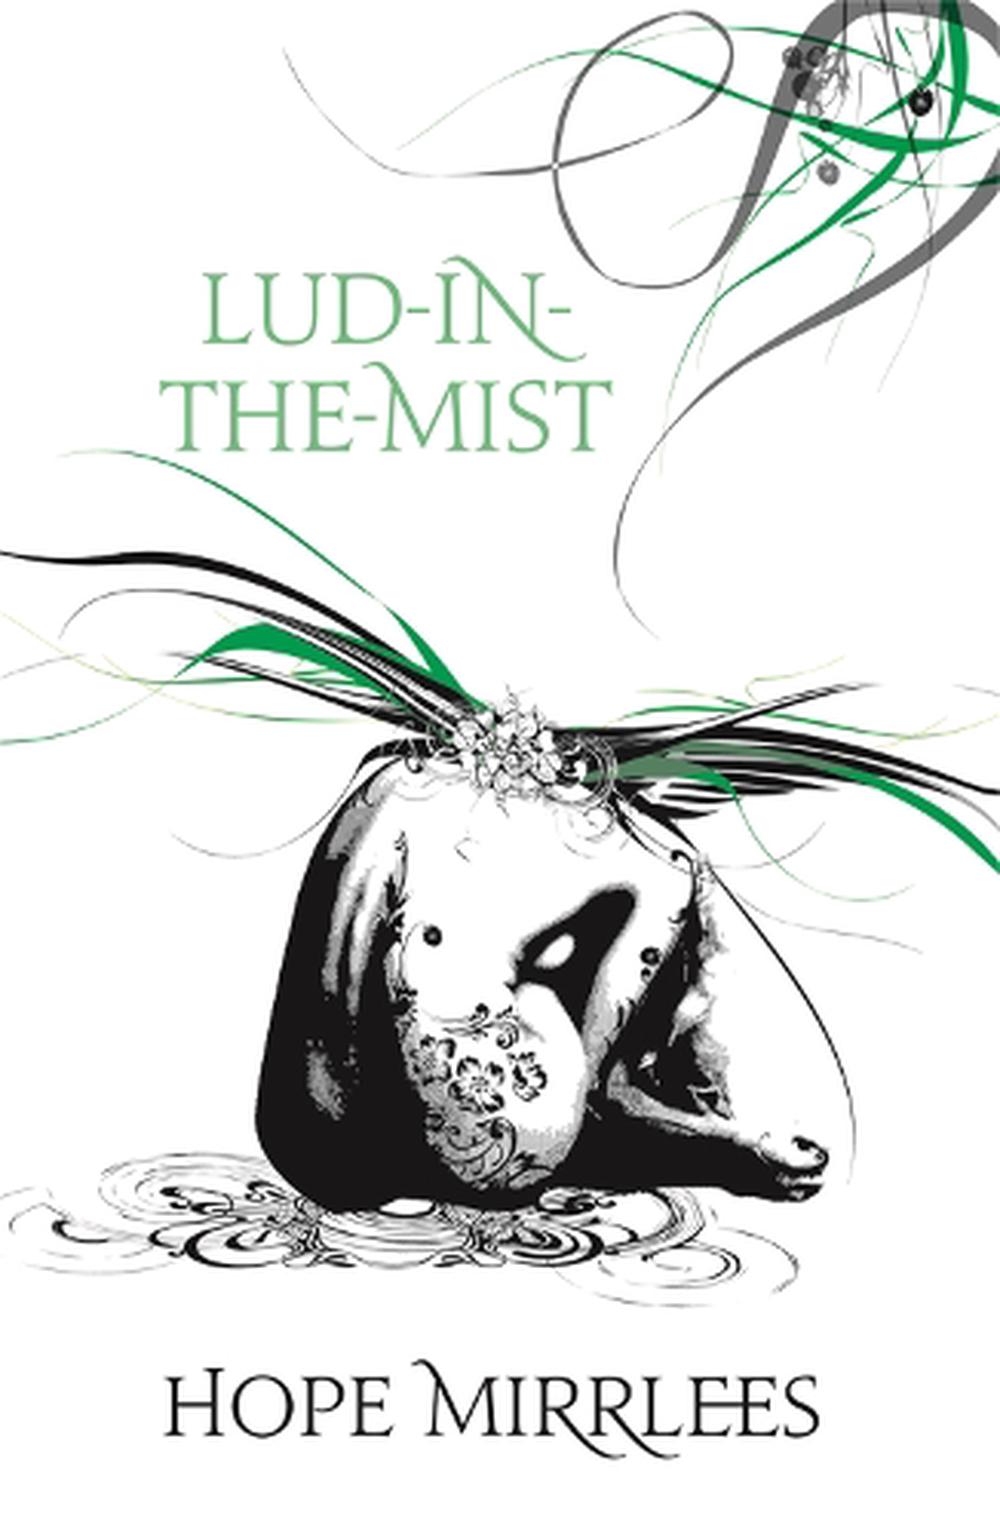 lud in the mist review